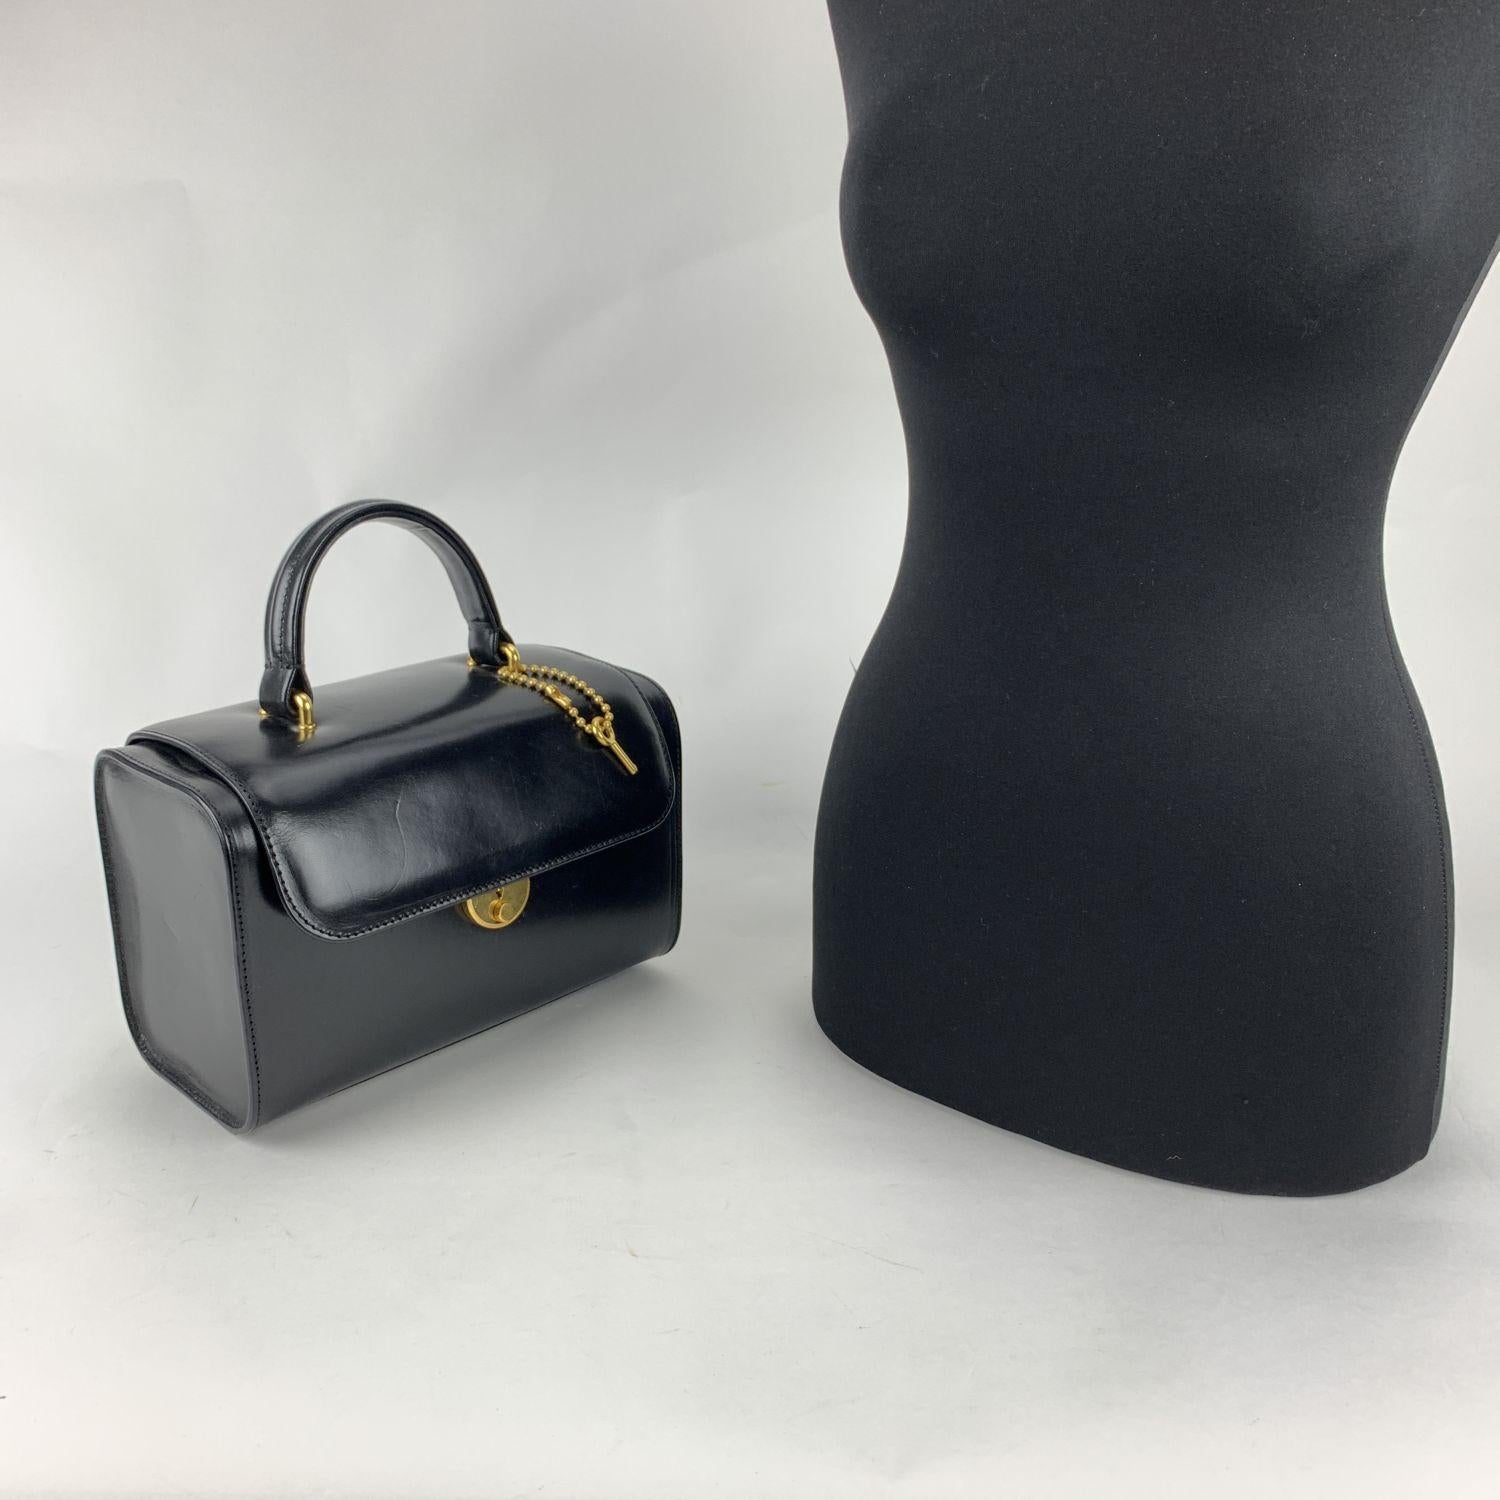 Maison Martin Margiela box-shaped 'Replica Bag' in black leather. The bag is a reproduction of a Travel beuty case design of the '70s. It features a key lock closure, 4 protective bottom feet, a top carry handle and a removable shoulder strap. 1